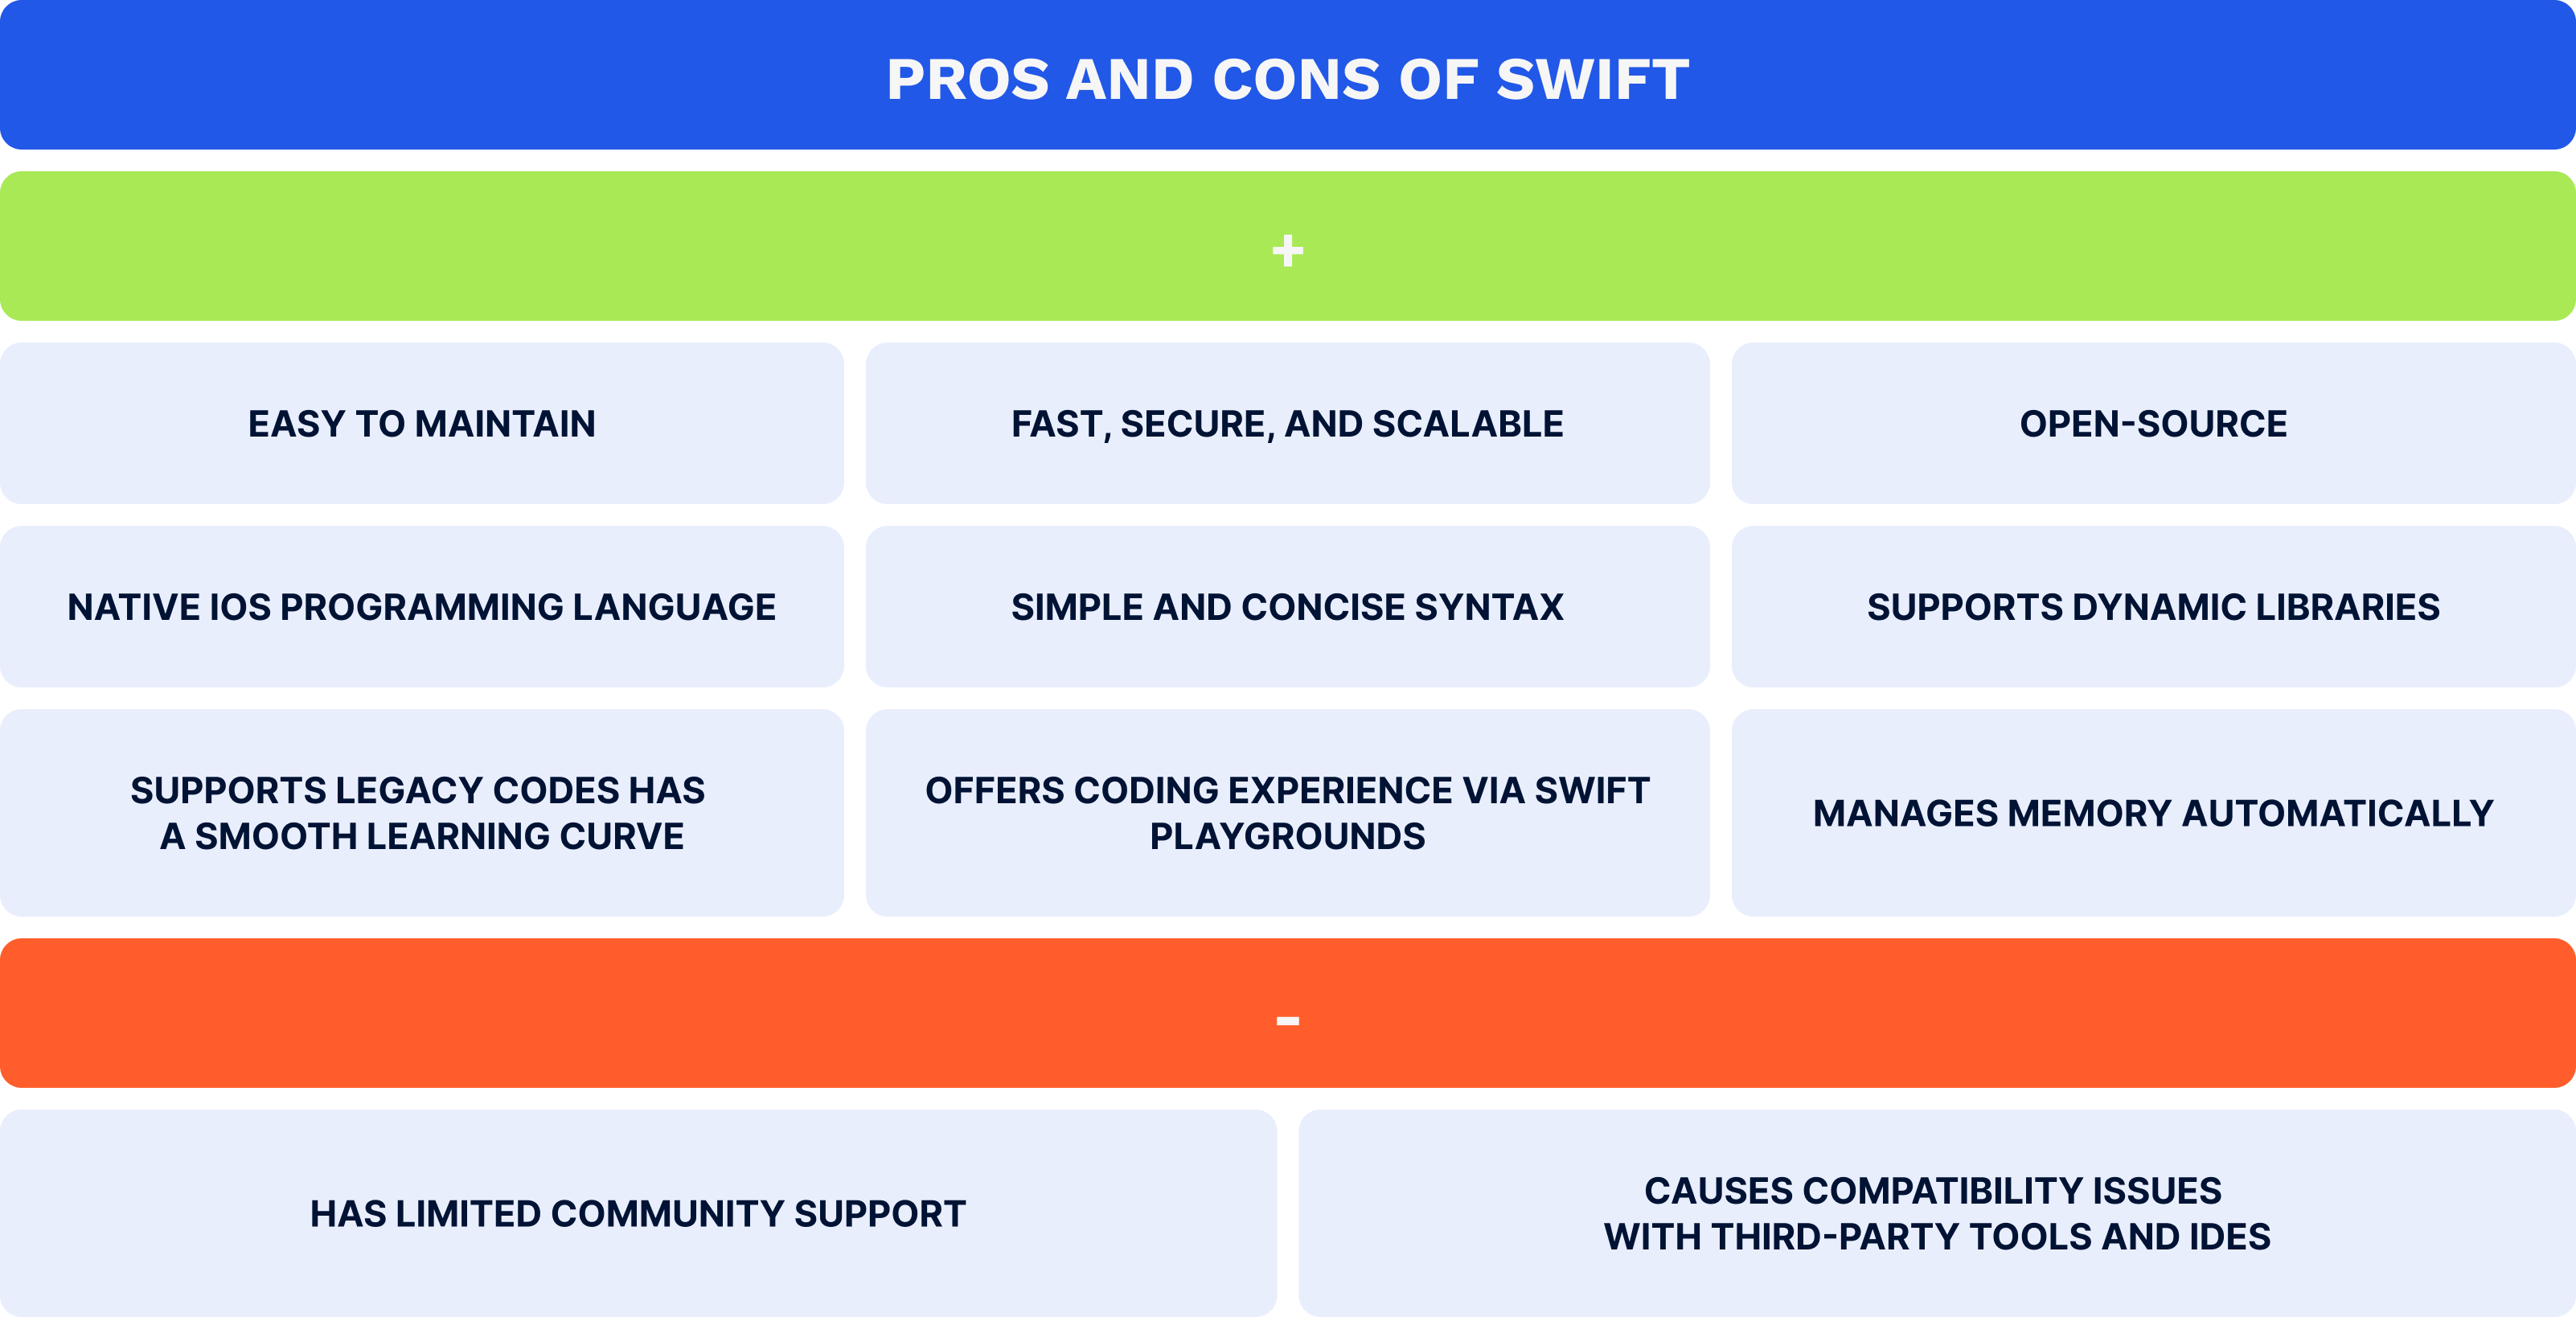 Pros and cons of Swift